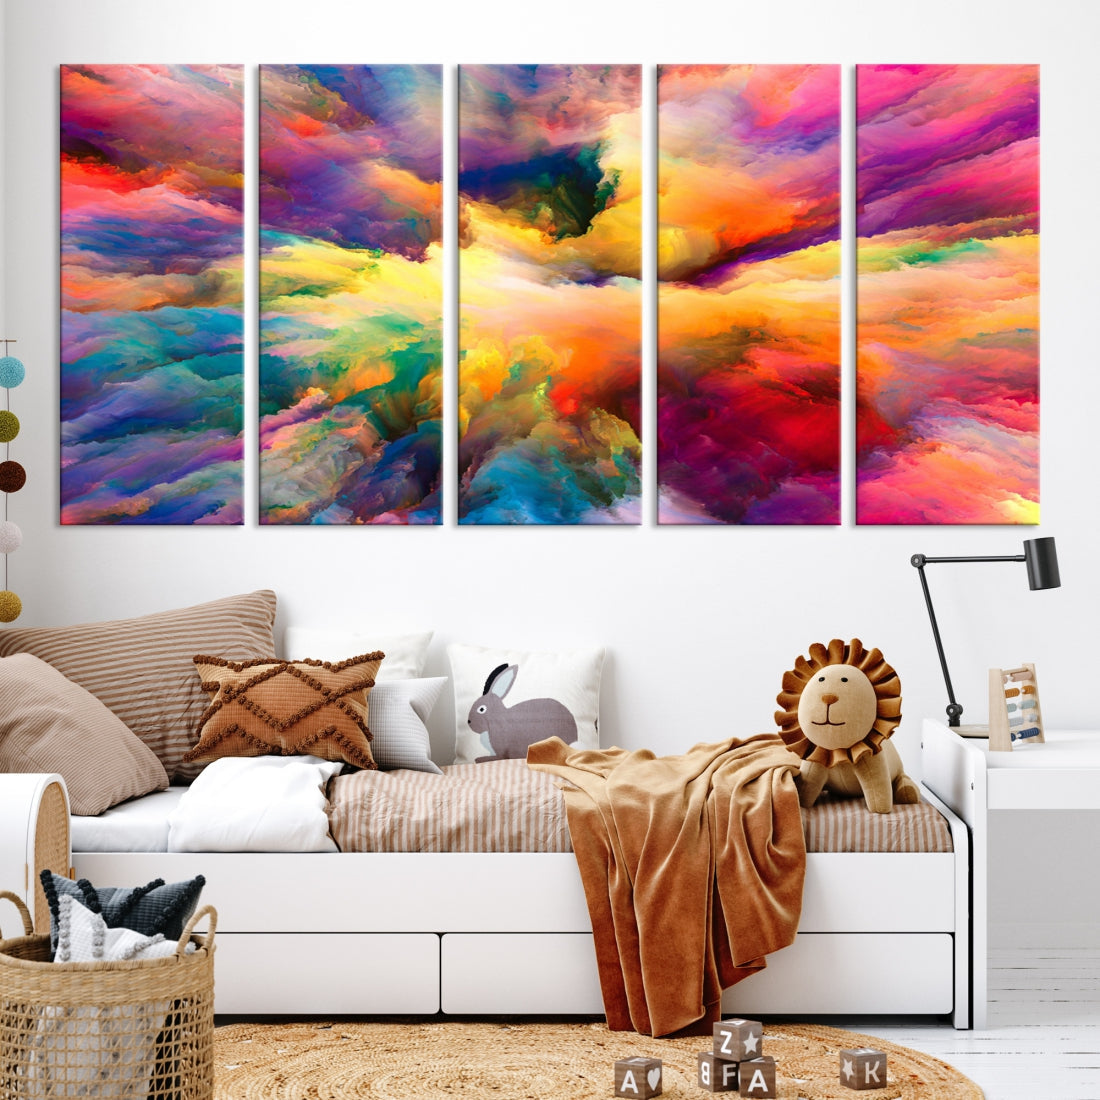 Modern Art Canvas Painting Colorful Clouds Abstract Big Size Canvas Art  Prints Poster for Living Room Home Decor 80x160cm-(31.5x62.9in)Framed-015